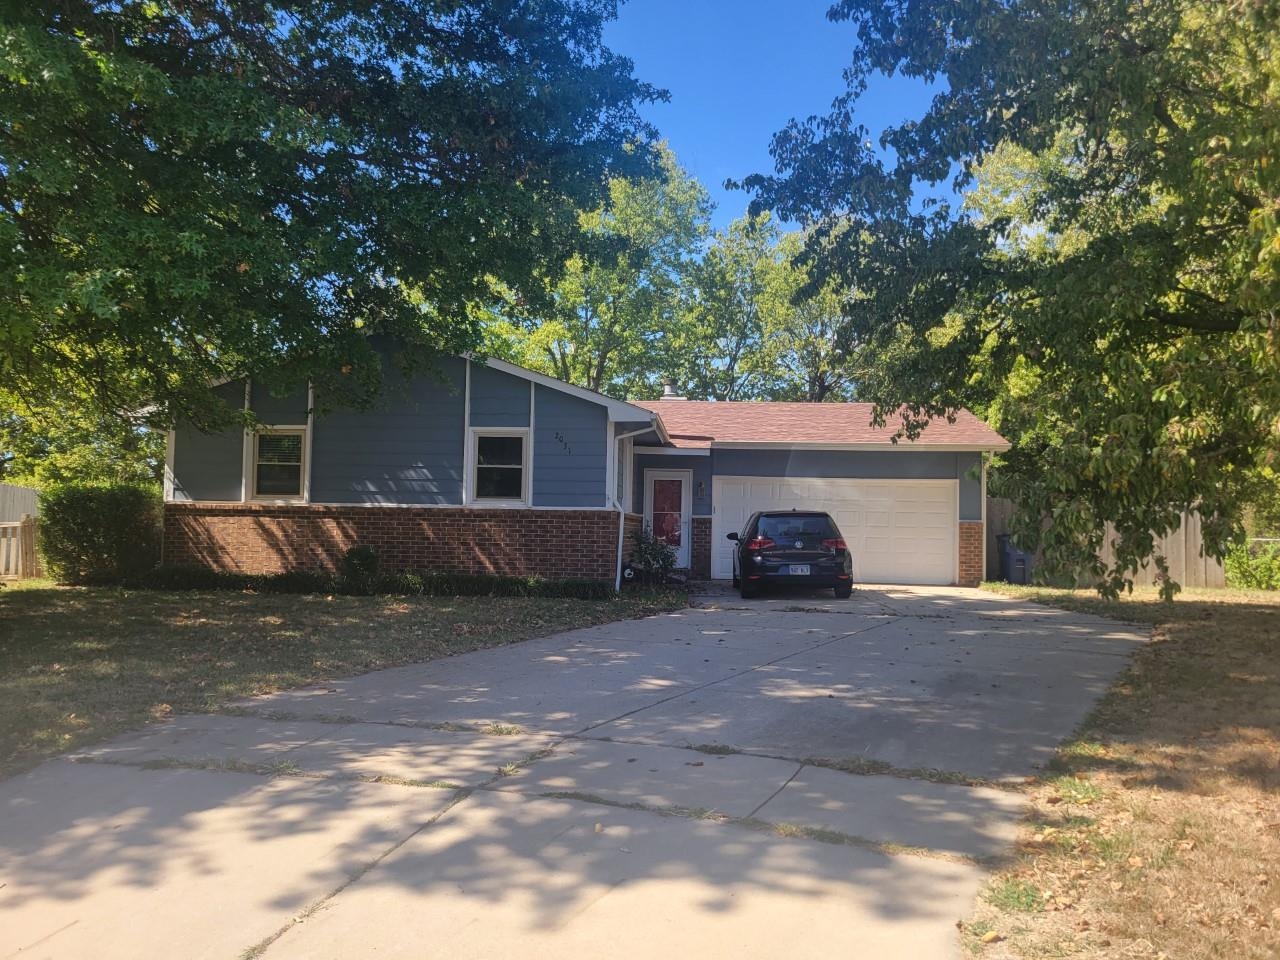 This home is located in a peaceful cul-de-sac with very little traffic. Home has many updated improvements. Upper level paint and trim. The 2nd bedroom New carpeting. Central Heat & Air and duct work new 2022. Hot water heater New in 2022. Guttering New 2020. Roof 2016.Main level has master bedroom with master bath and second bedroom and 2nd bath. Lower level features an inviting Family room with cozy fireplace!! Also 3rd bedroom on lower level. Large bathroom where washer/dryer hookups are conveniently located! Outside of home is BEAUTIFUL Lake with walking path. Fully fenced yard and Large Deck perfect for spending time with family, friends and your FURRY FRIENDS!!!